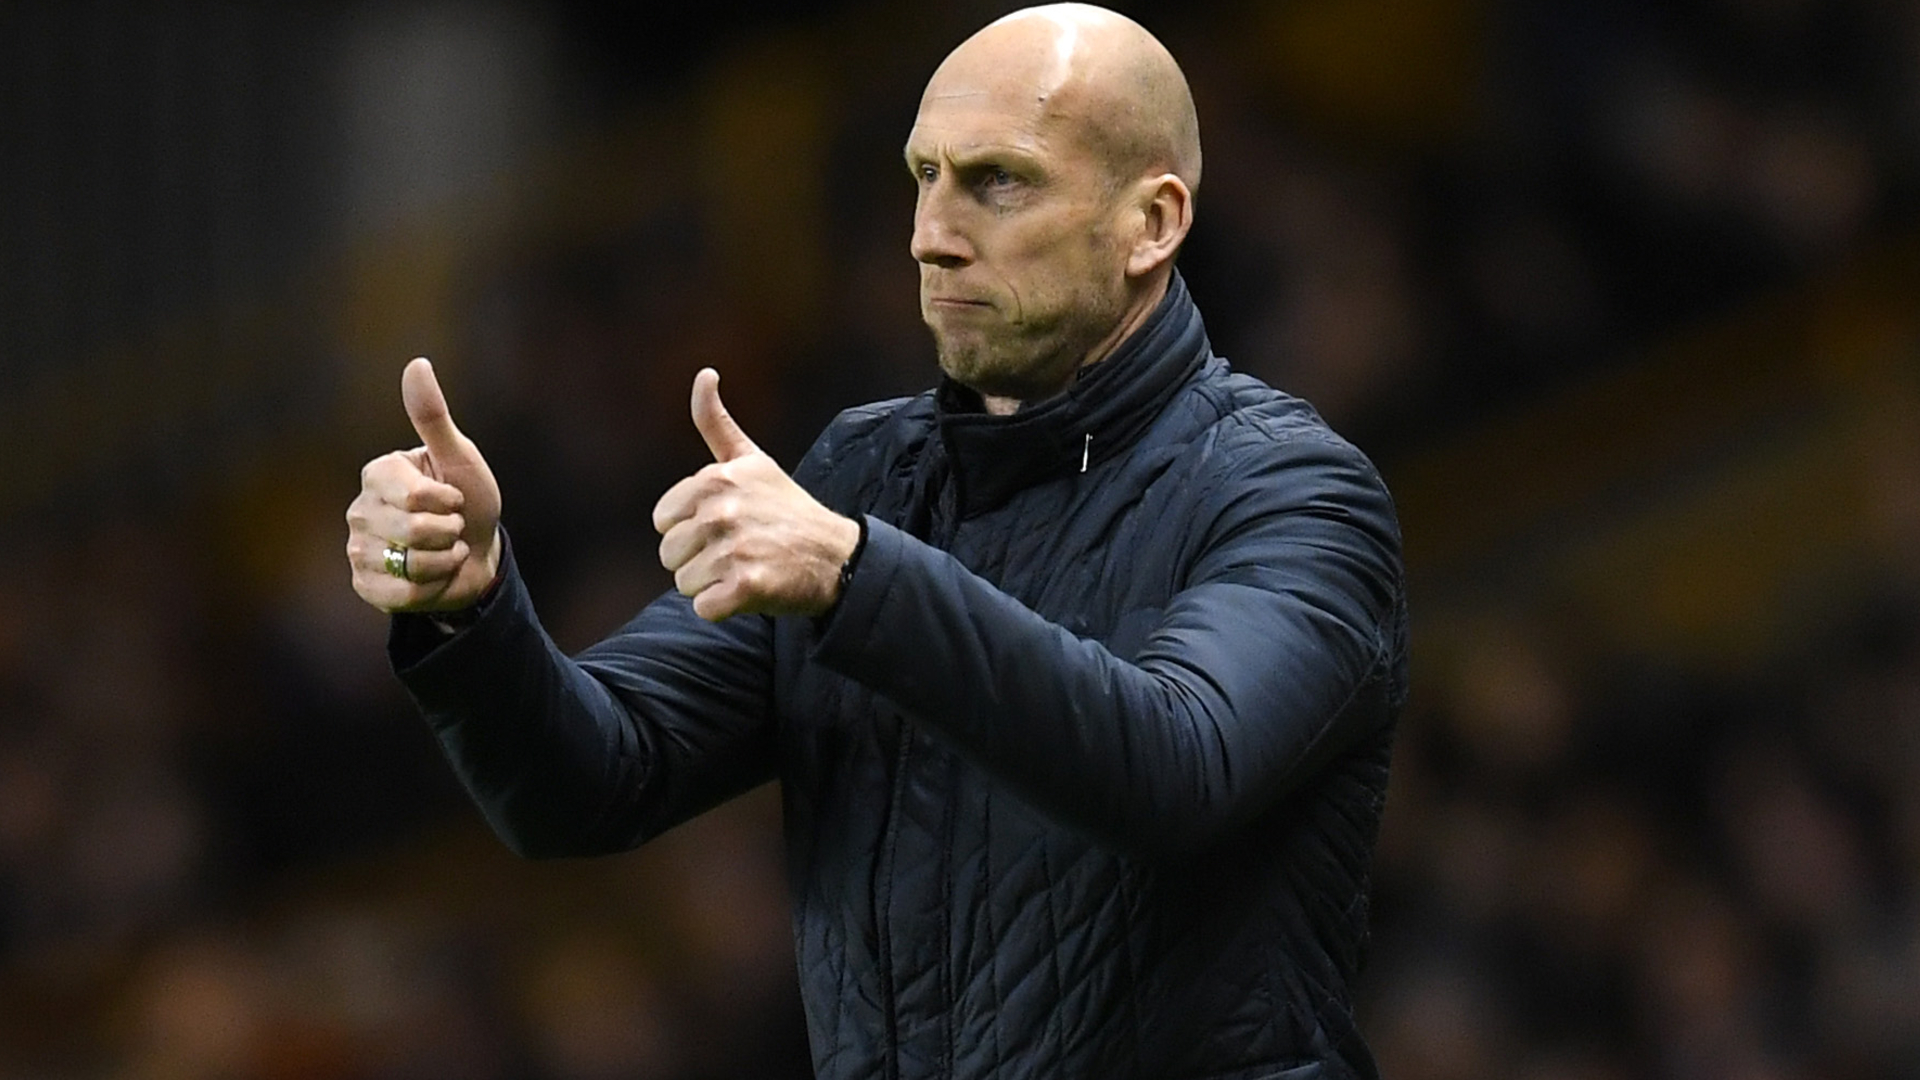 FC Cincinnati appoint former Reading and Feyenoord manager Stam as new head coach